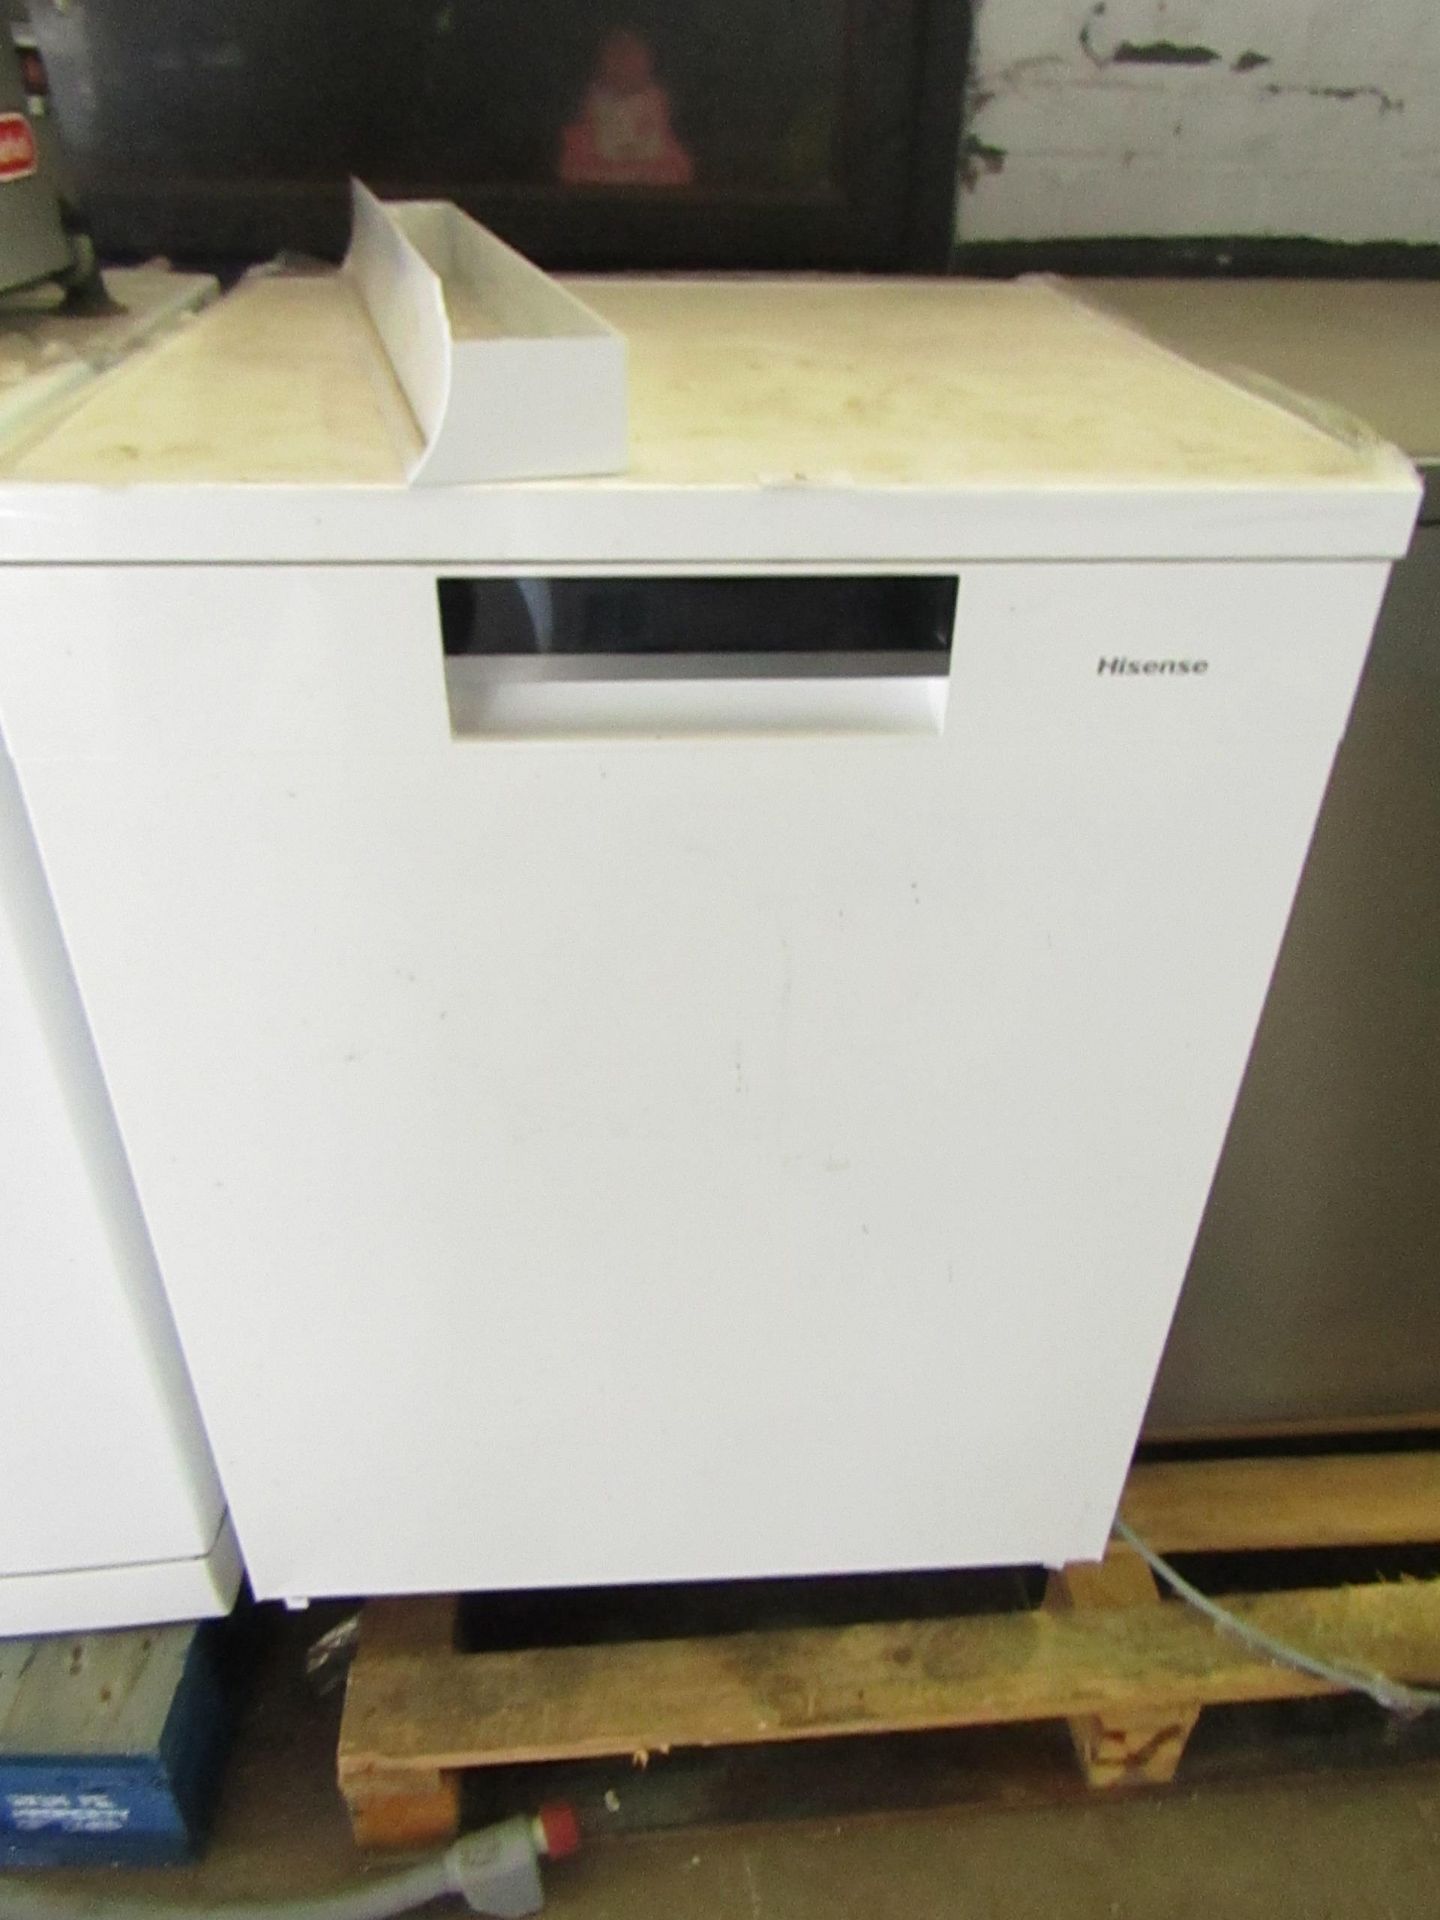 Hisense HS661C60xUK Freestanding Dishwasher, powers on and looks fairly clean inside, RRP £399